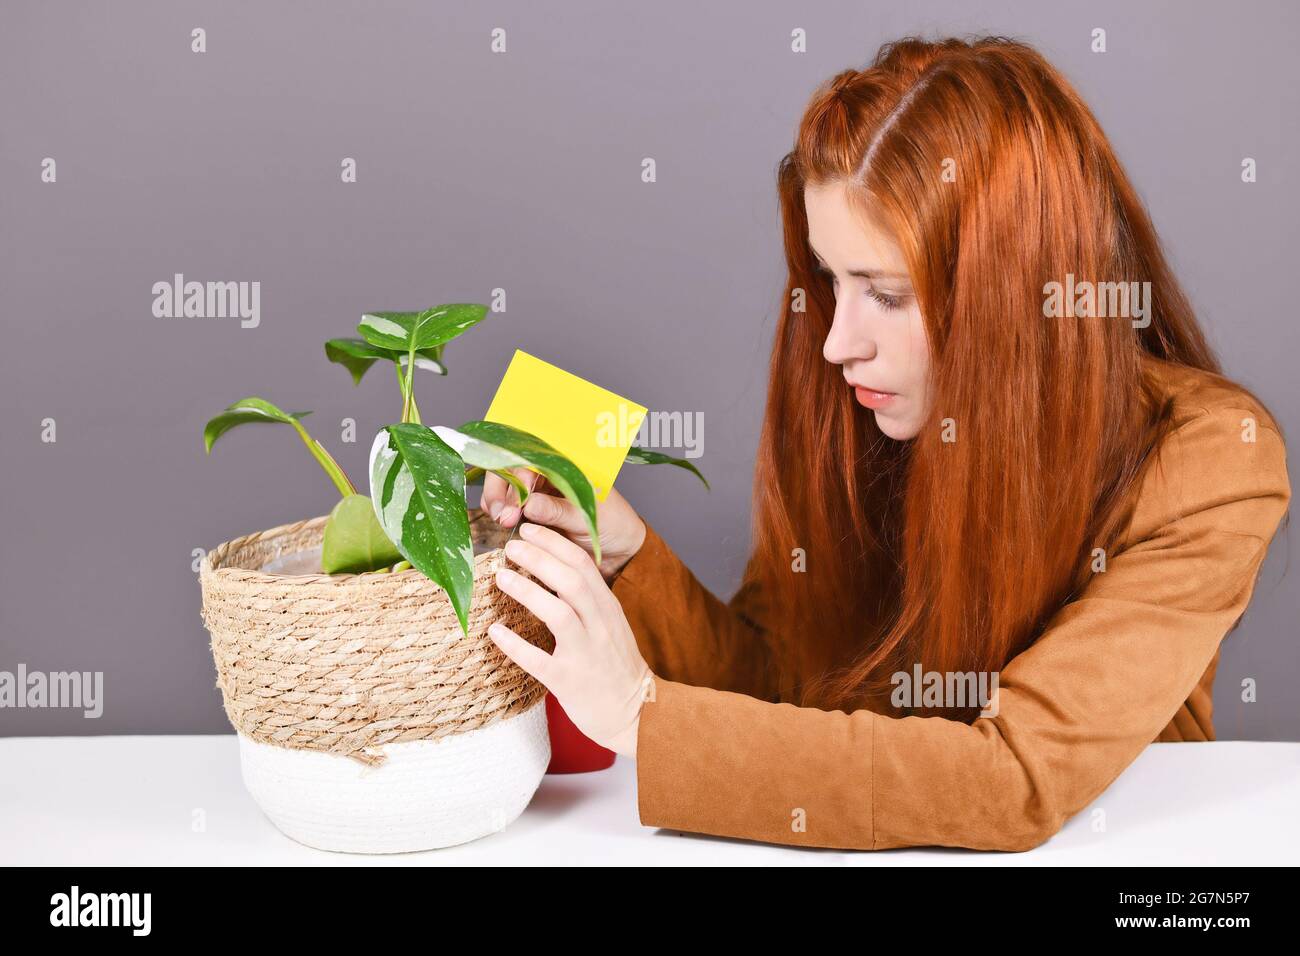 Woman putting yellow sticky card into houseplant pot to fight  fungus gnats pests Stock Photo